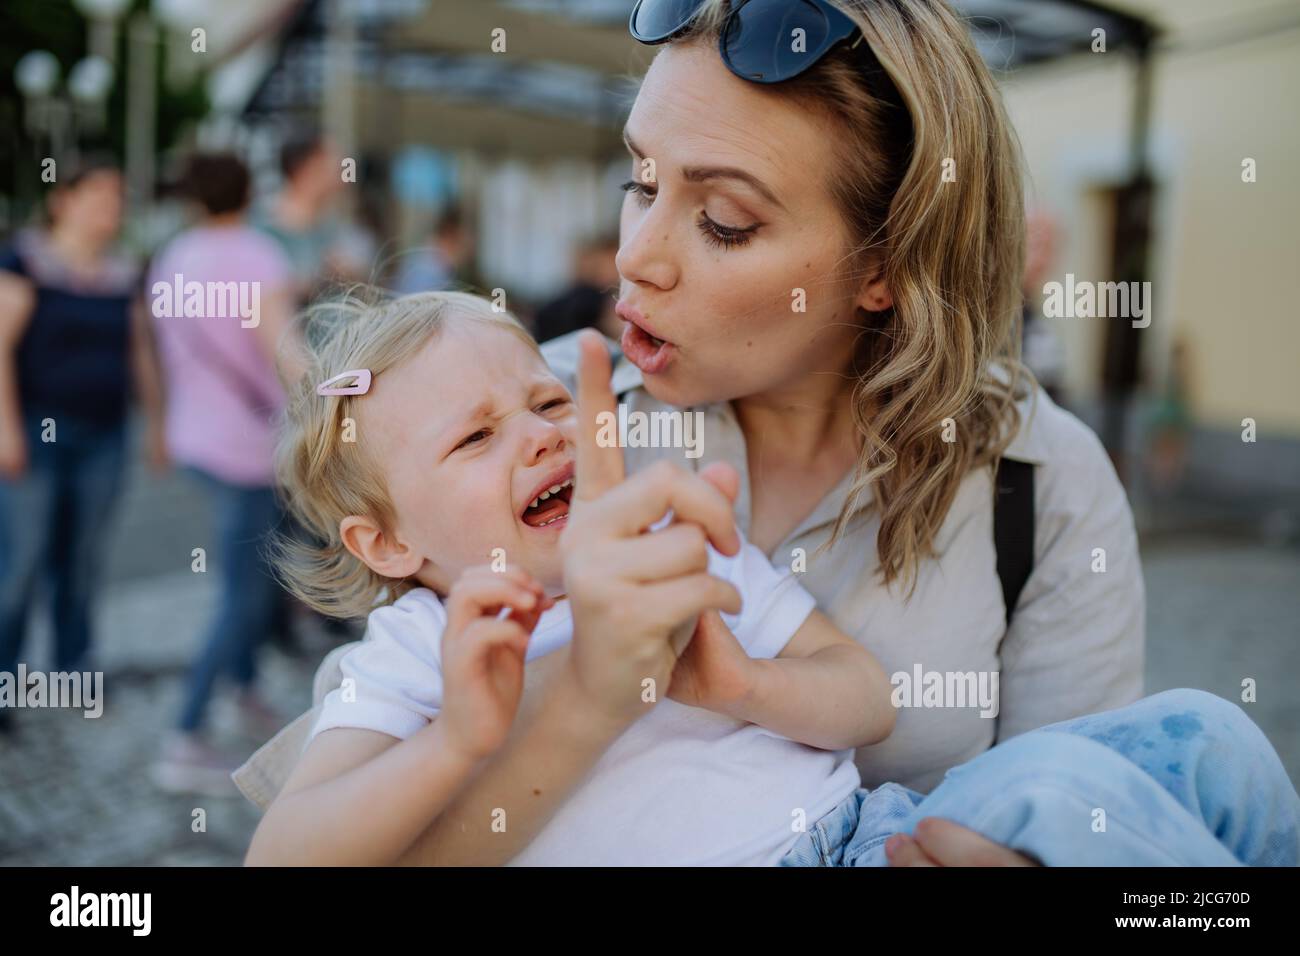 Mother scolding her little daughter in street. Child is crying and woman is shaking finger because of child's bad behavior. Stock Photo